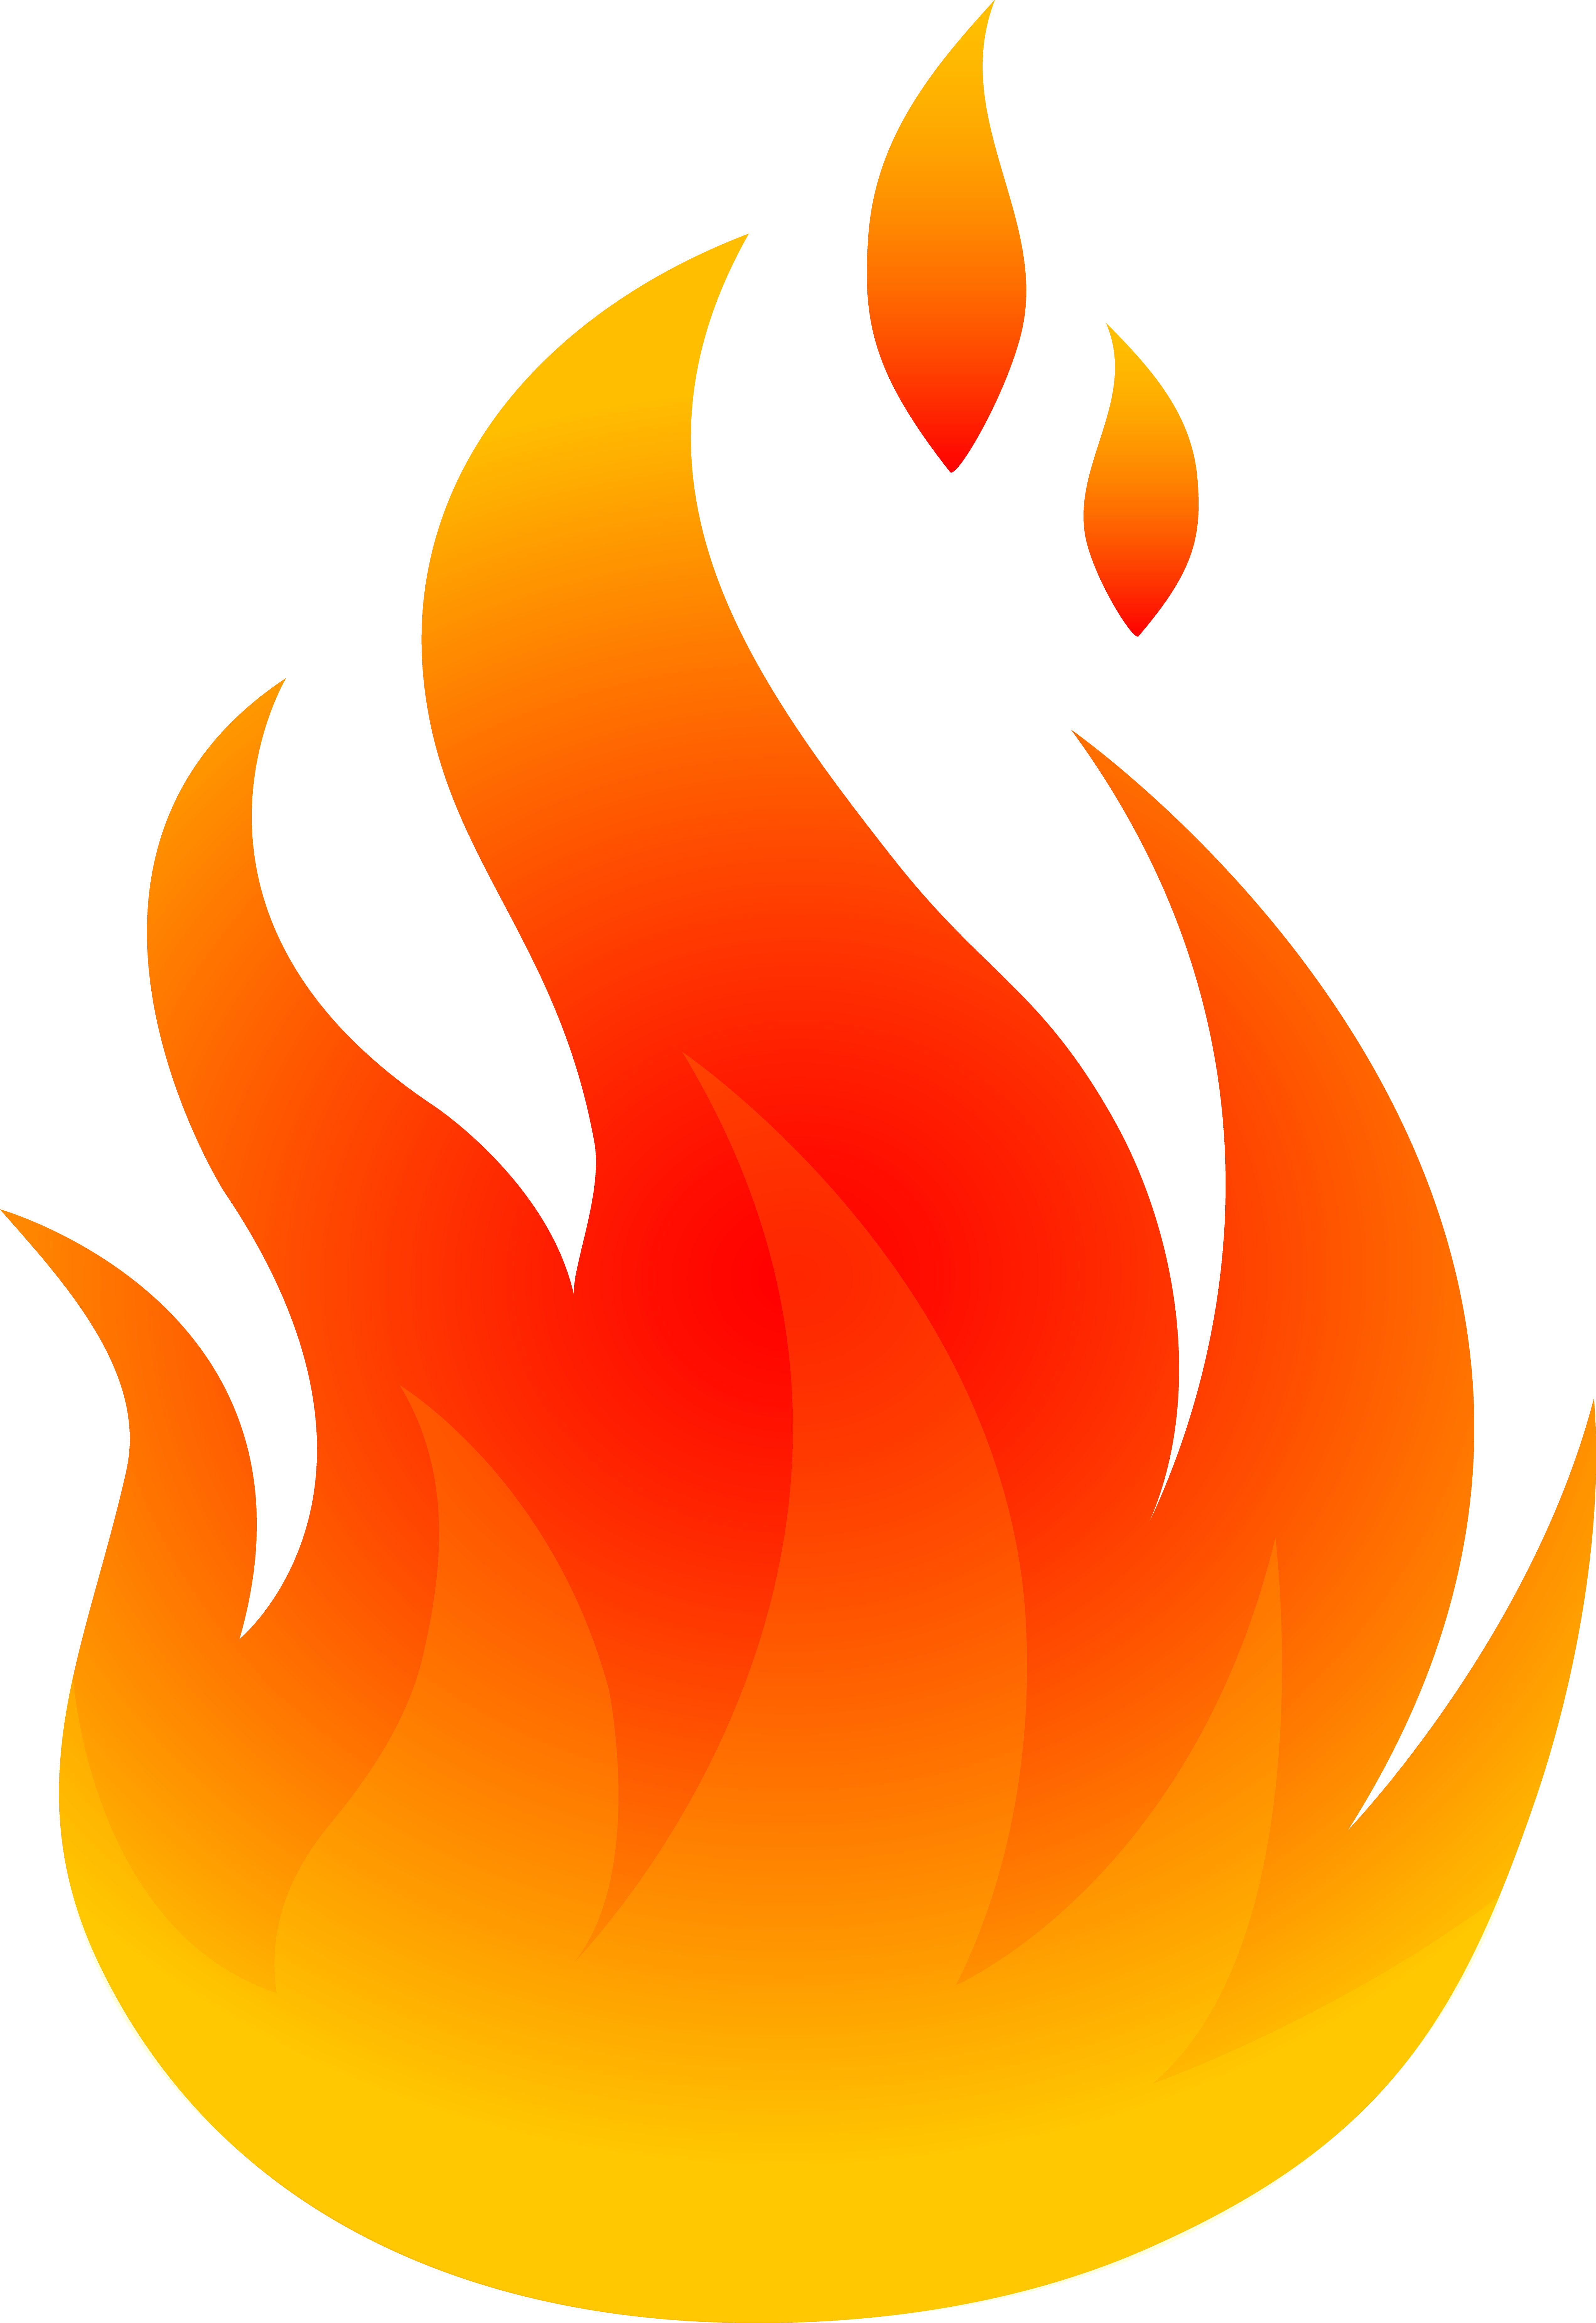 Free Cartoon Fire Png, Download Free Cartoon Fire Png png images, Free